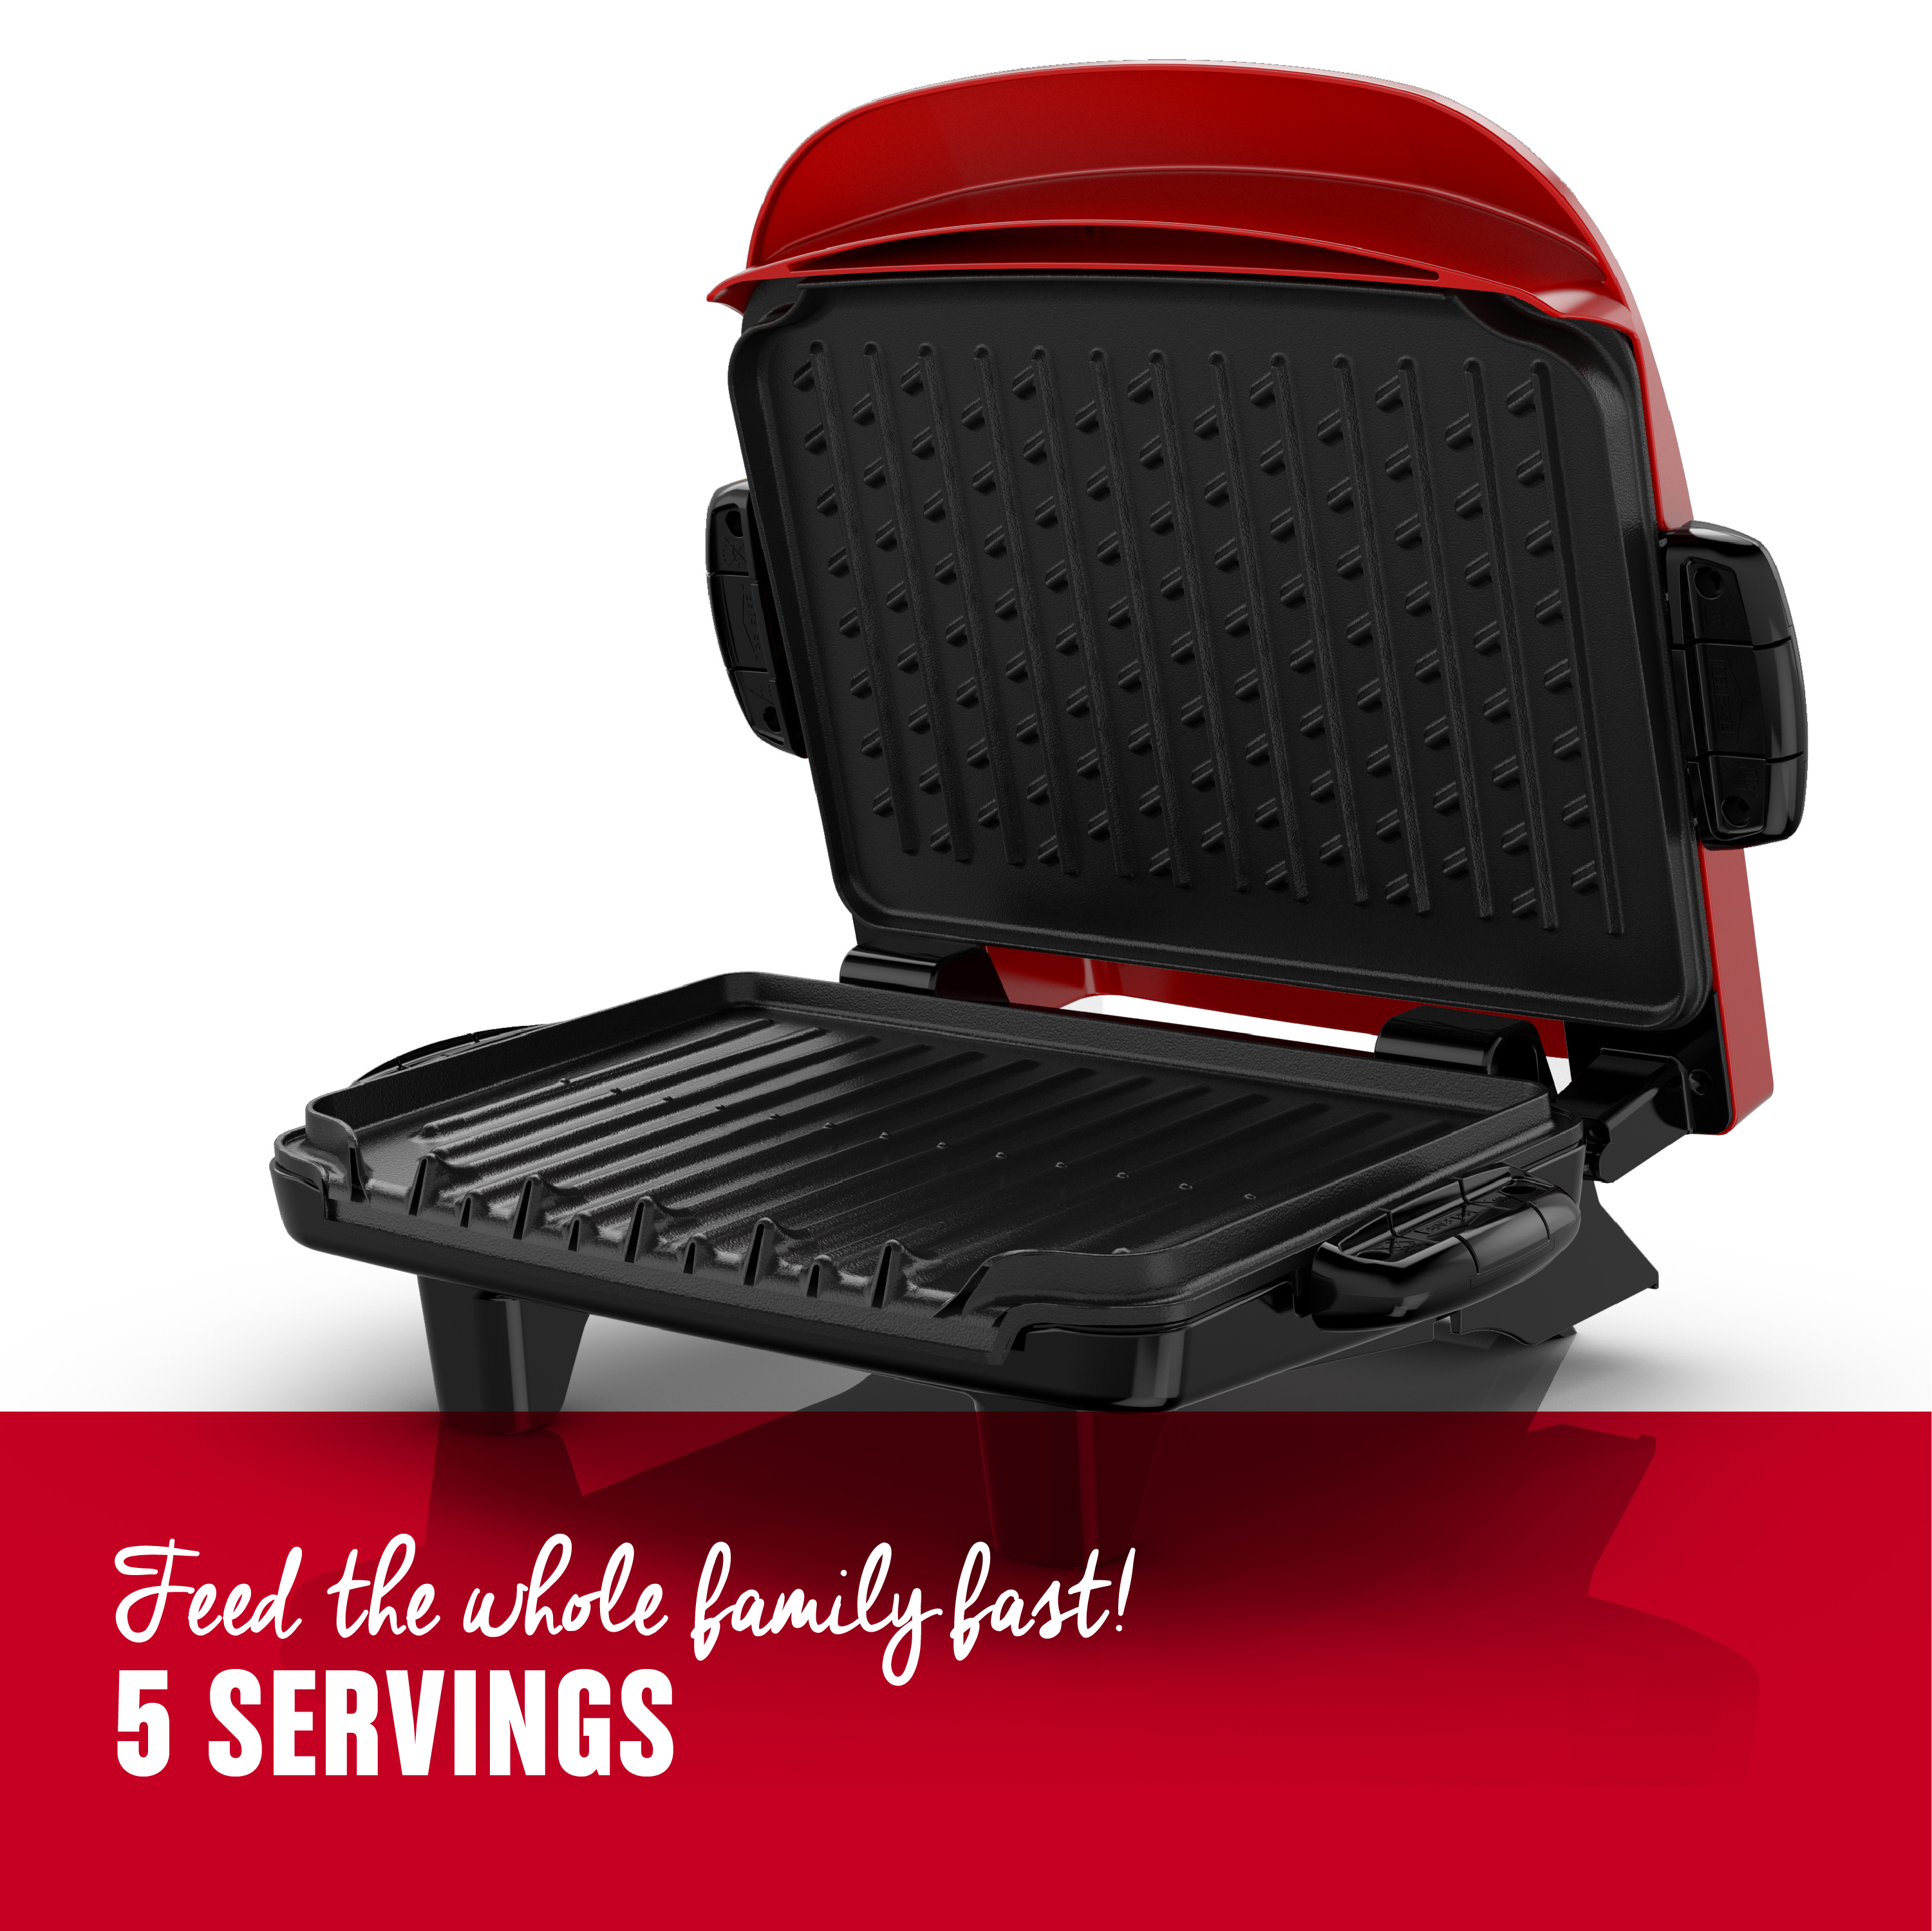 George Foreman 5-Serving Removable Plate Grill and Panini Press, Red, GRP2841R - image 3 of 12